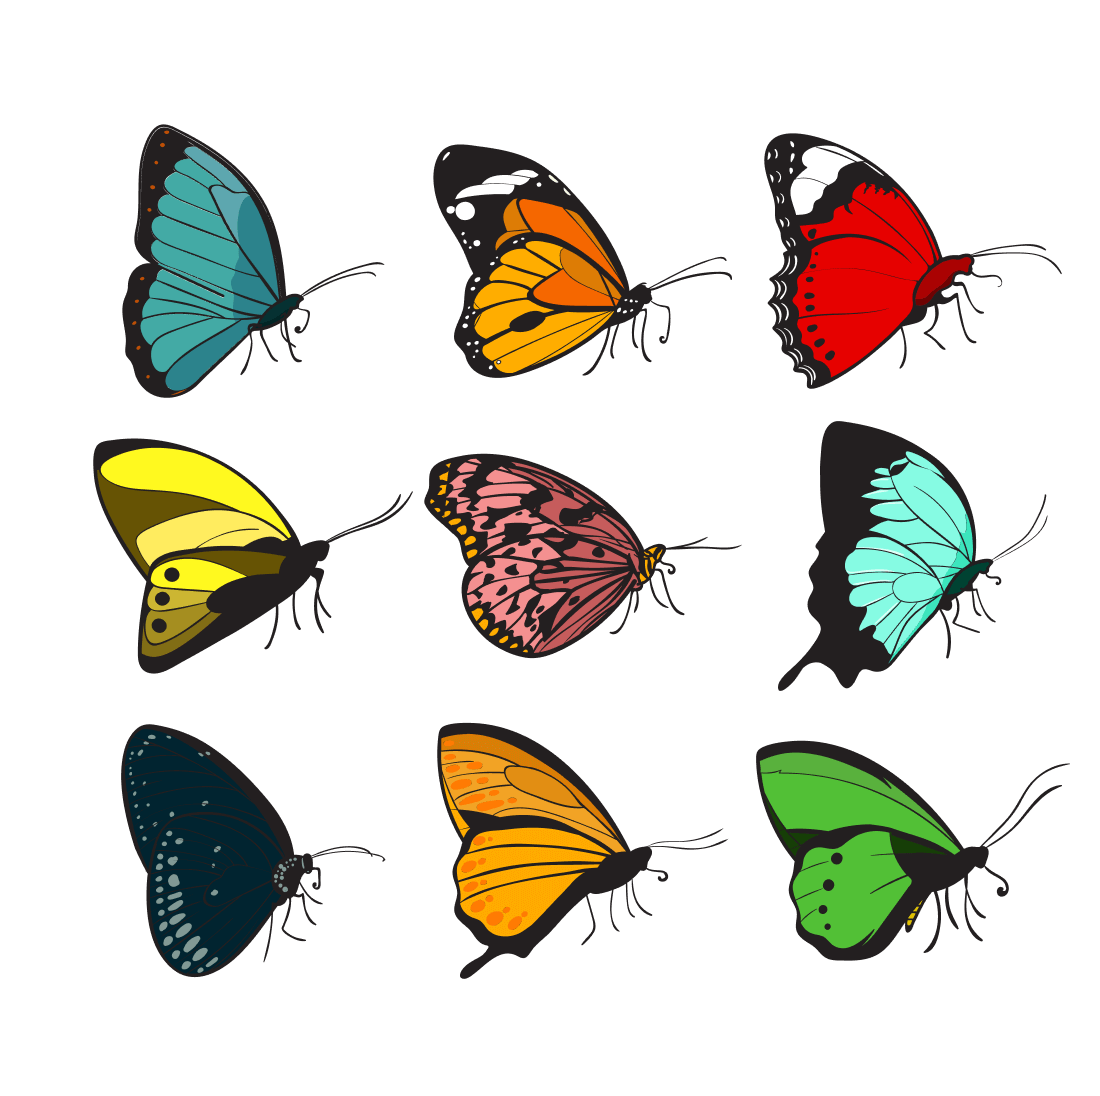 Group of colorful butterflies on a white background.